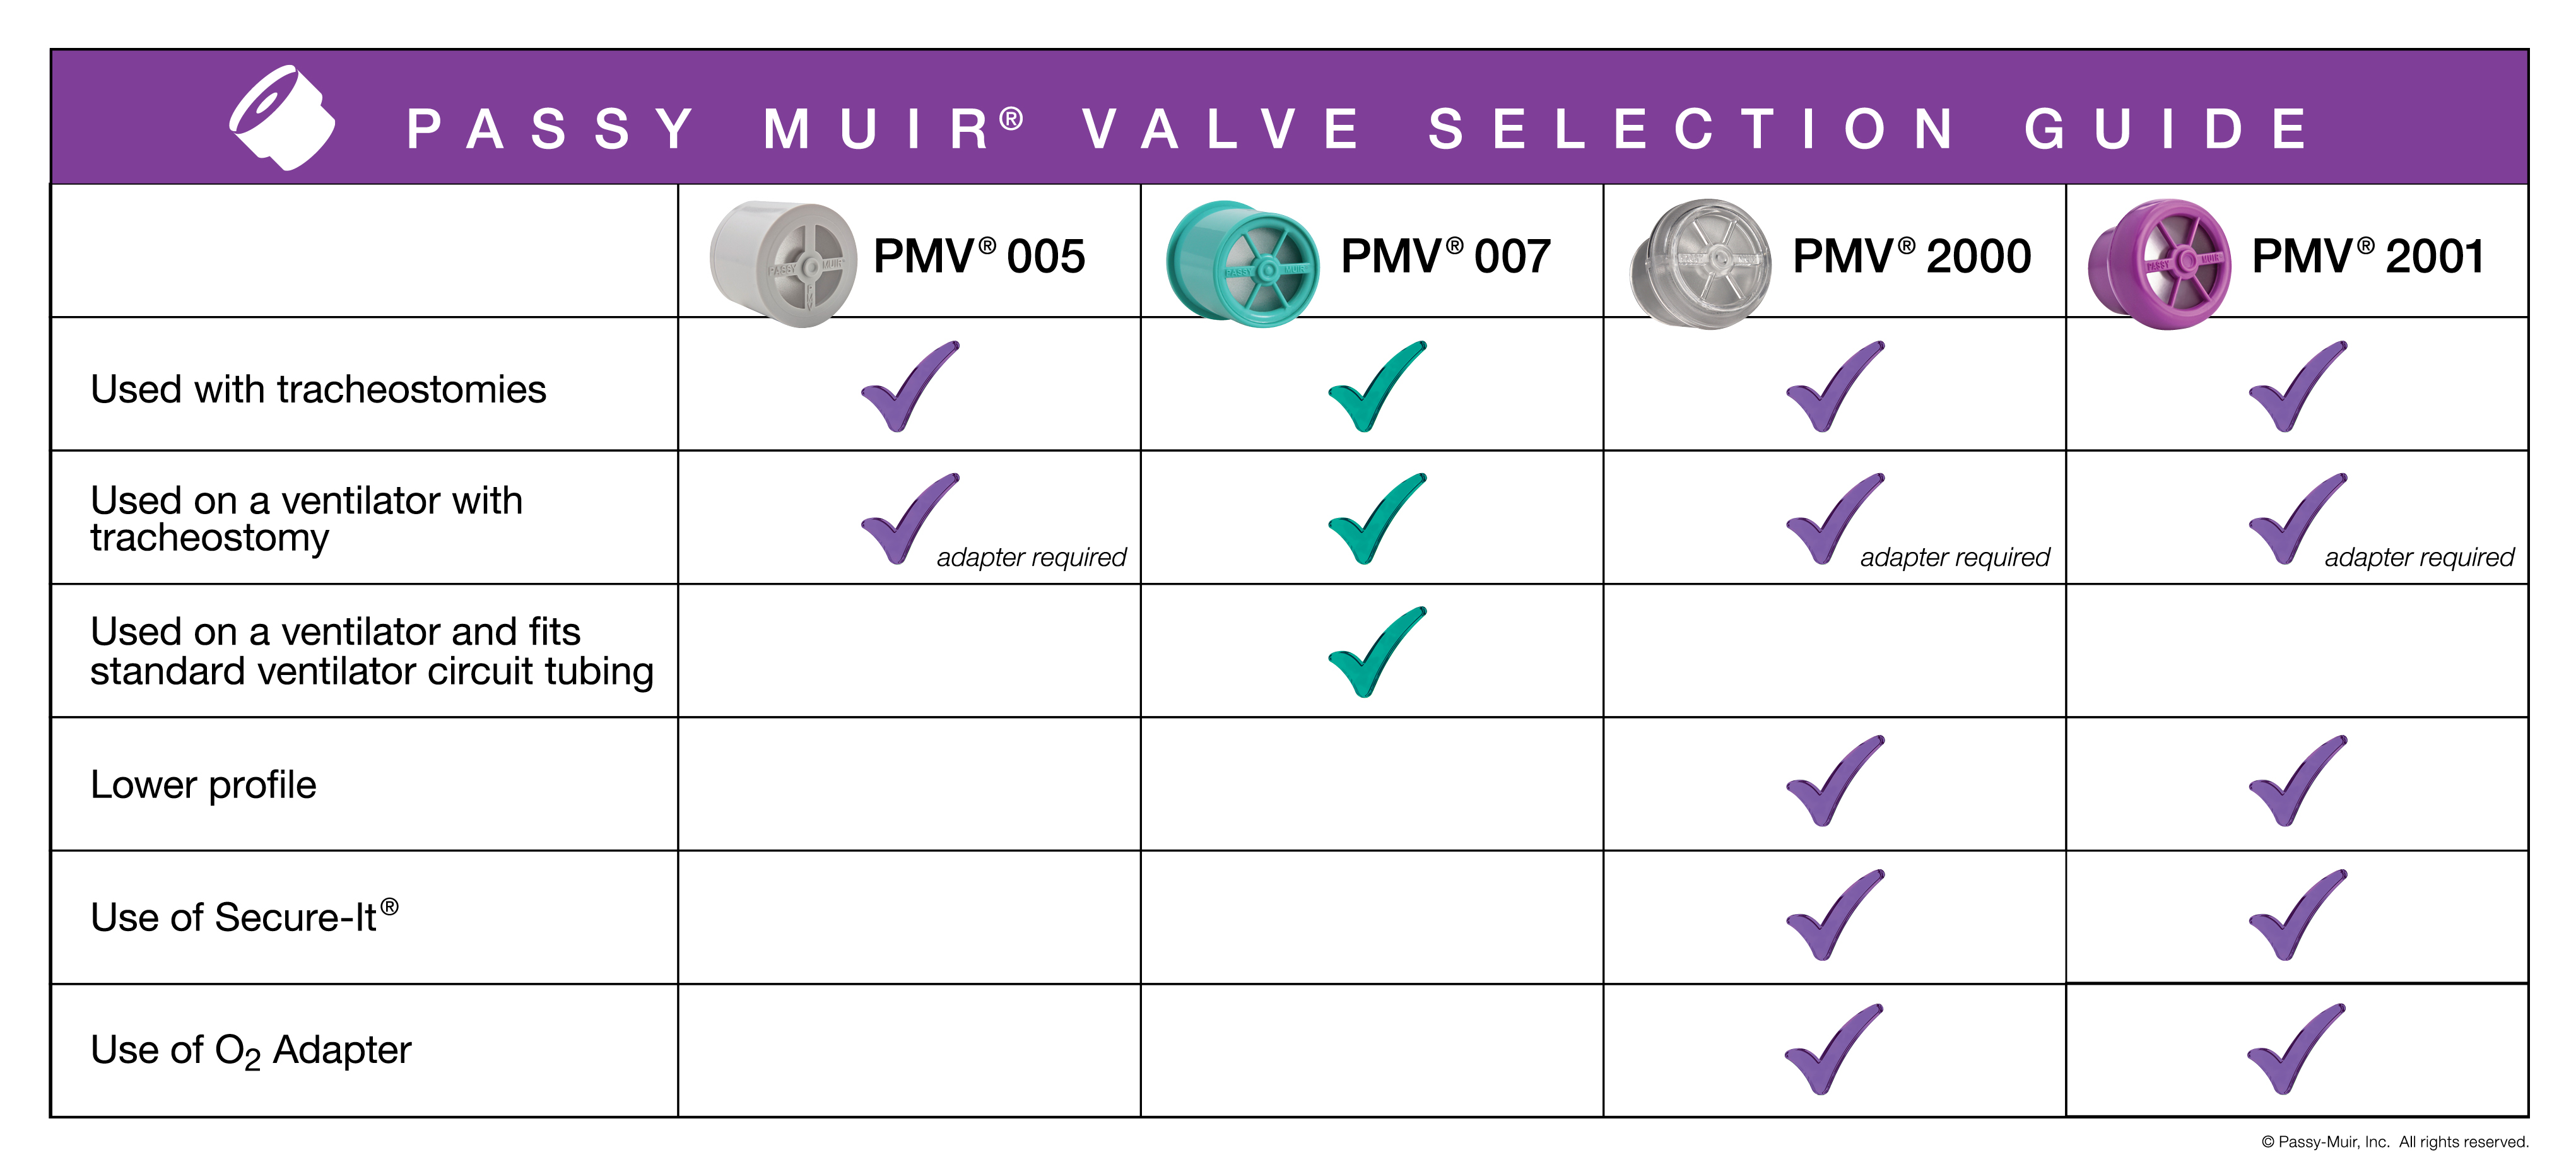 Passy Muir Valve Selection Guide